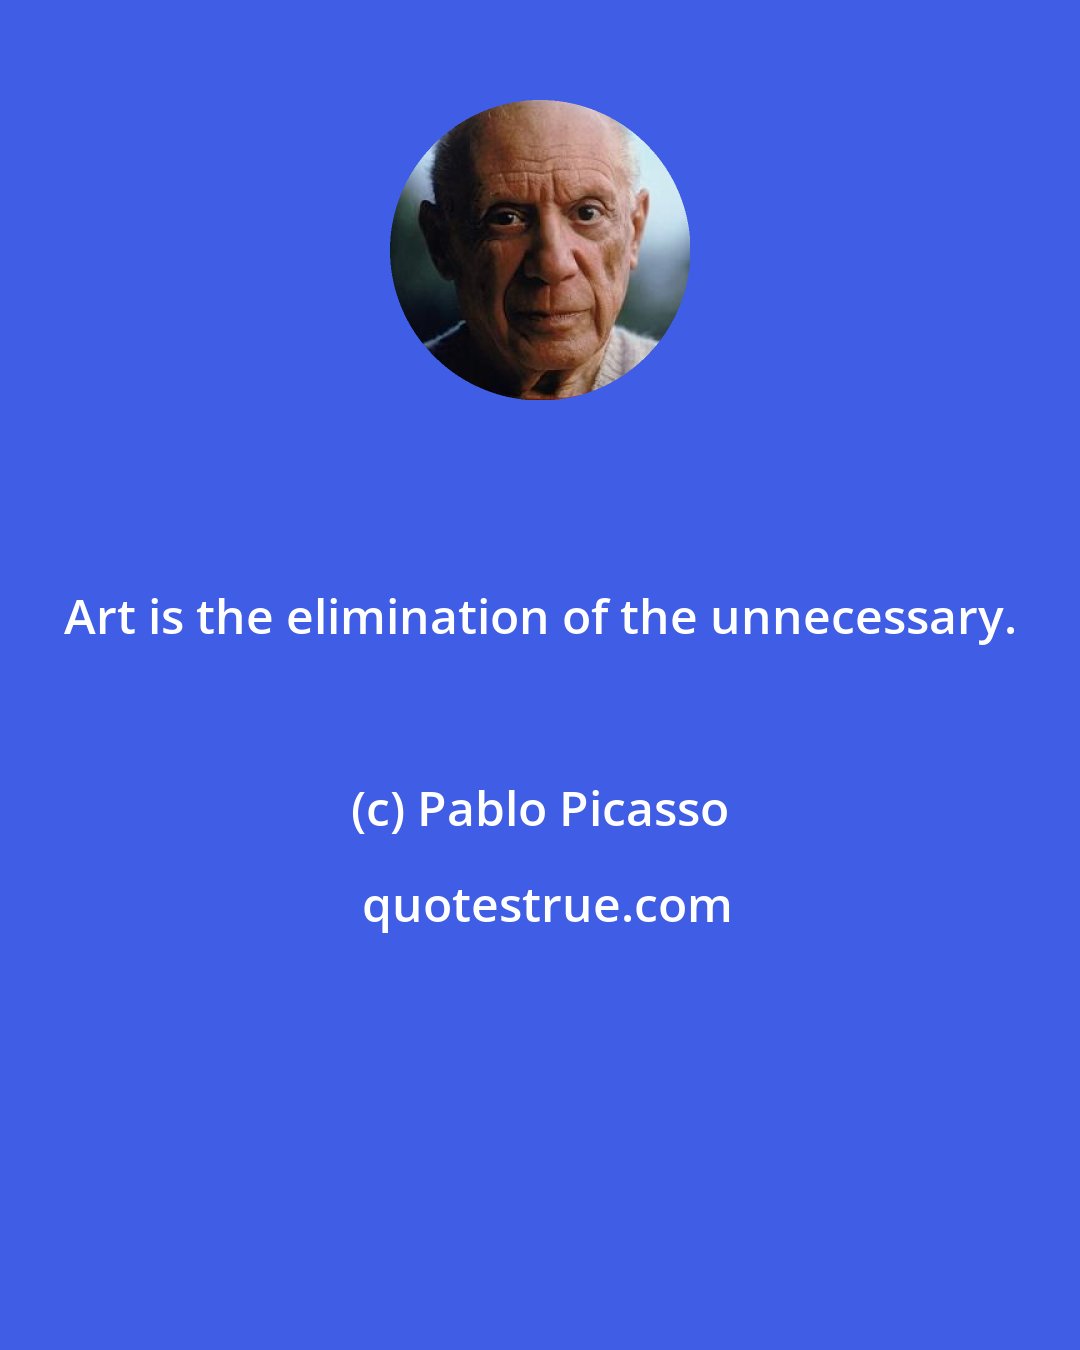 Pablo Picasso: Art is the elimination of the unnecessary.